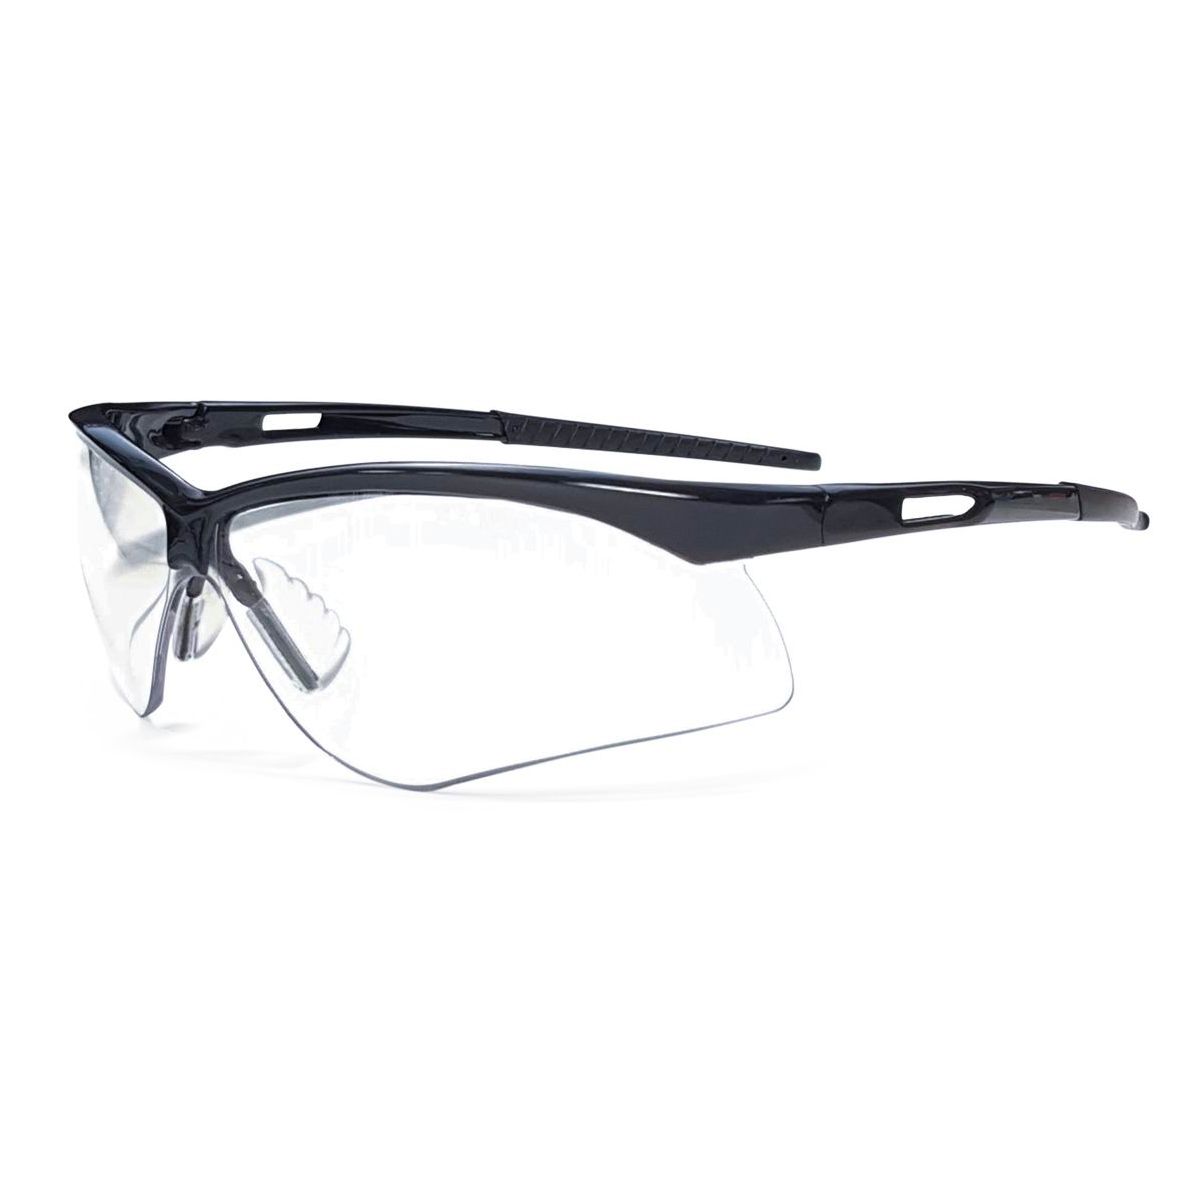 RADNOR® Premier Series Black Safety Glasses With Clear Polycarbonate Anti-Fog/Anti-Scratch Lens (Availability restrictions apply